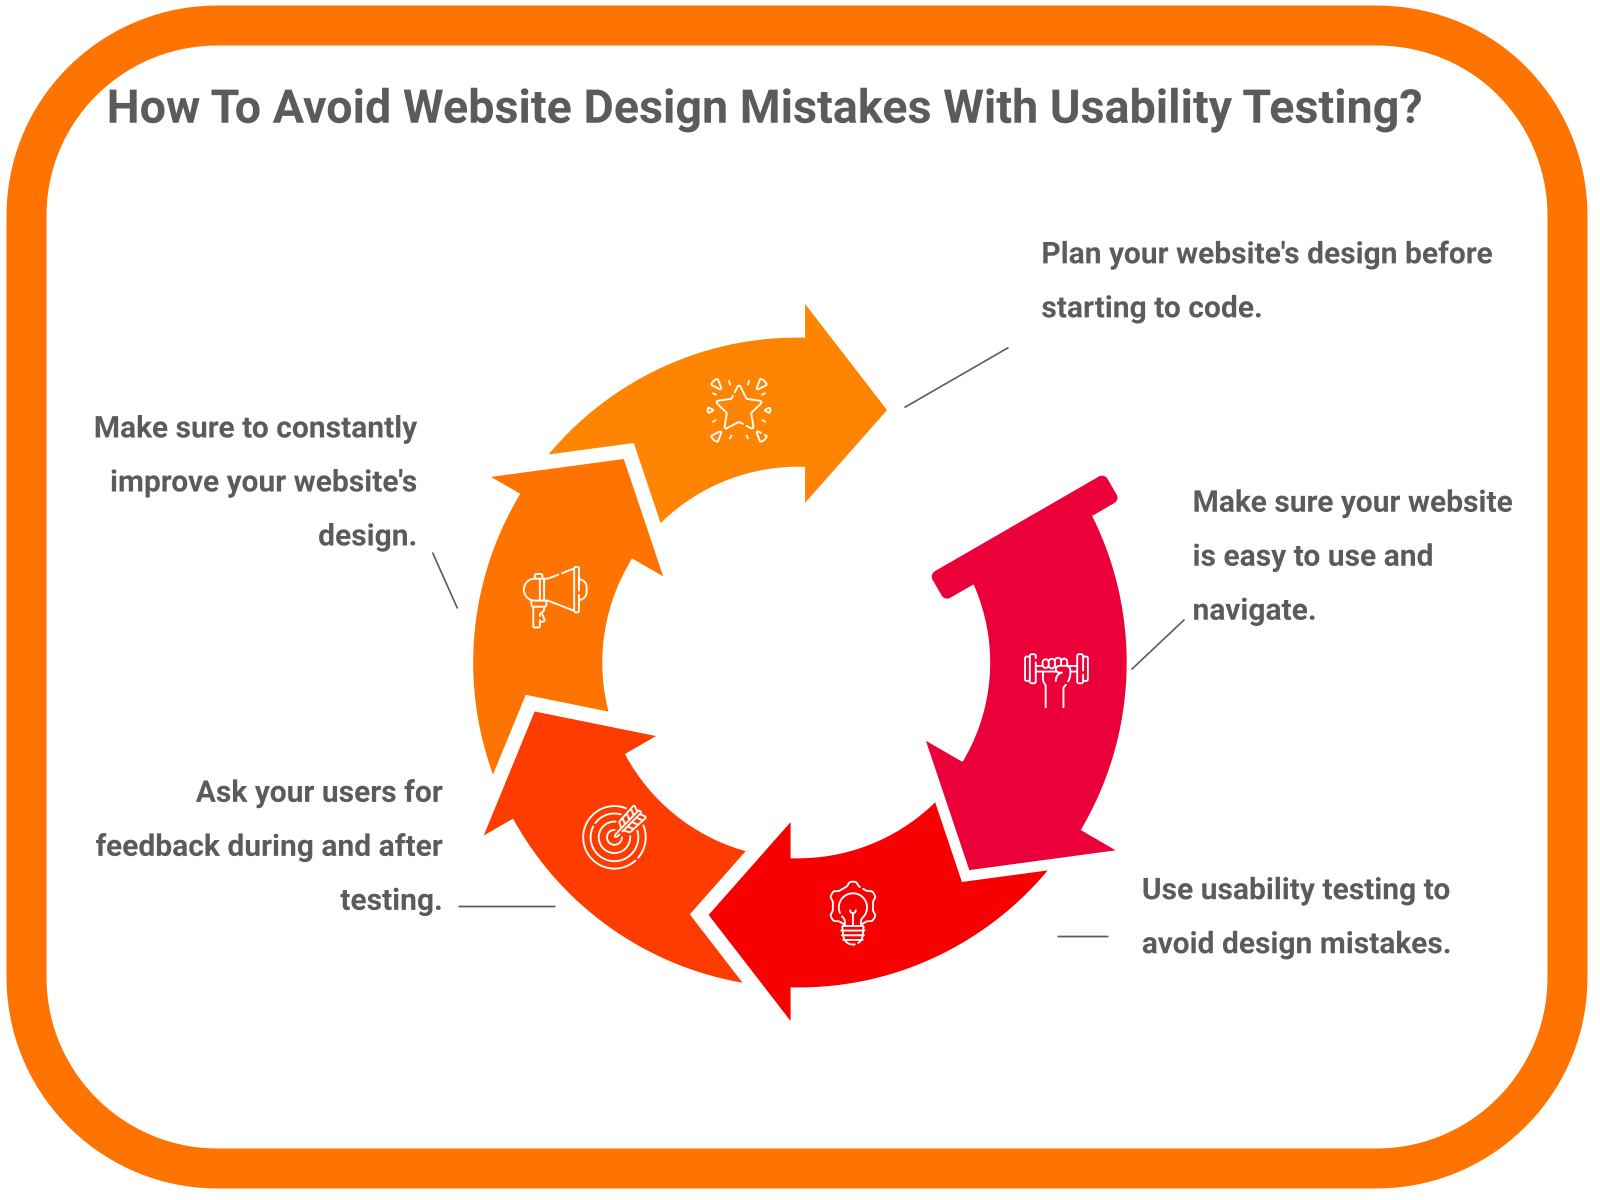 How To Avoid Website Design Mistakes With Usability Testing?